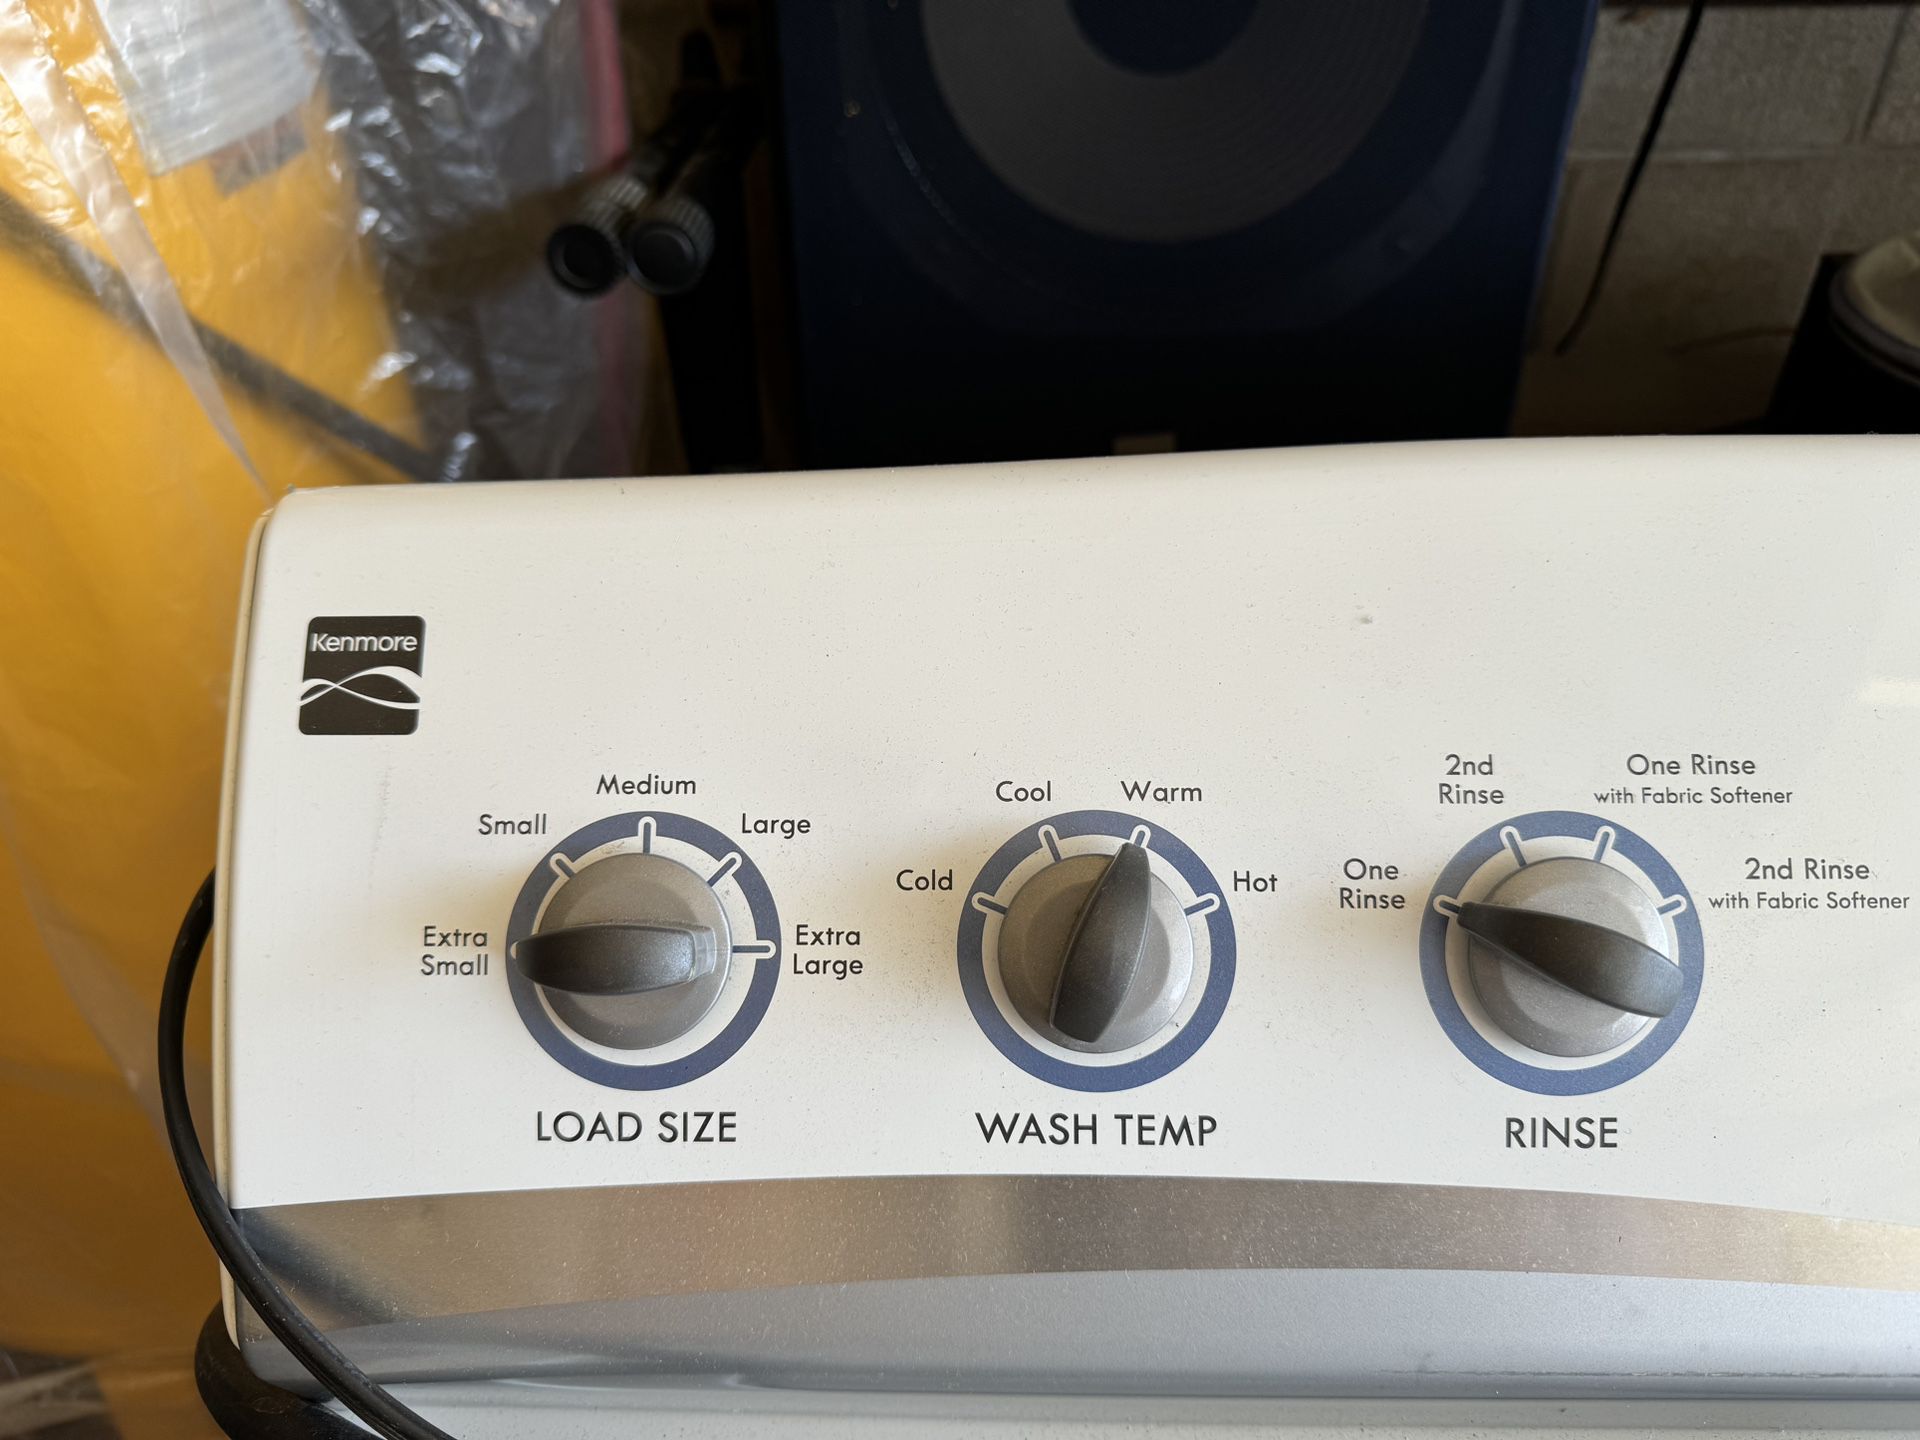 Washer and Dryer Combo